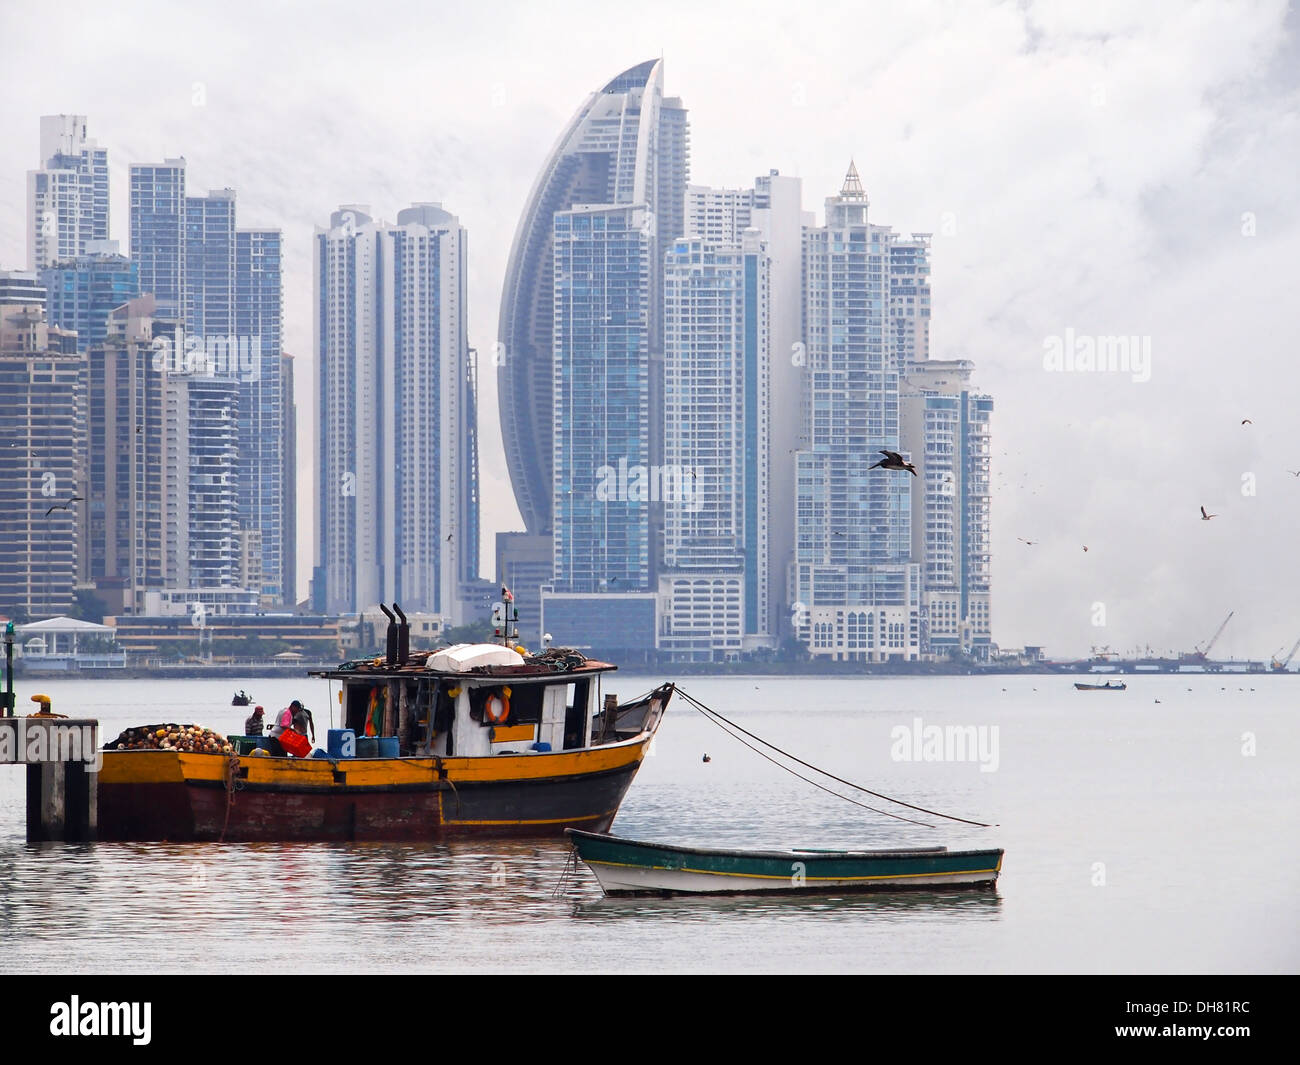 Old fishing boat in foreground with skyscrapers in background, Panama City , Panama, Central America Stock Photo